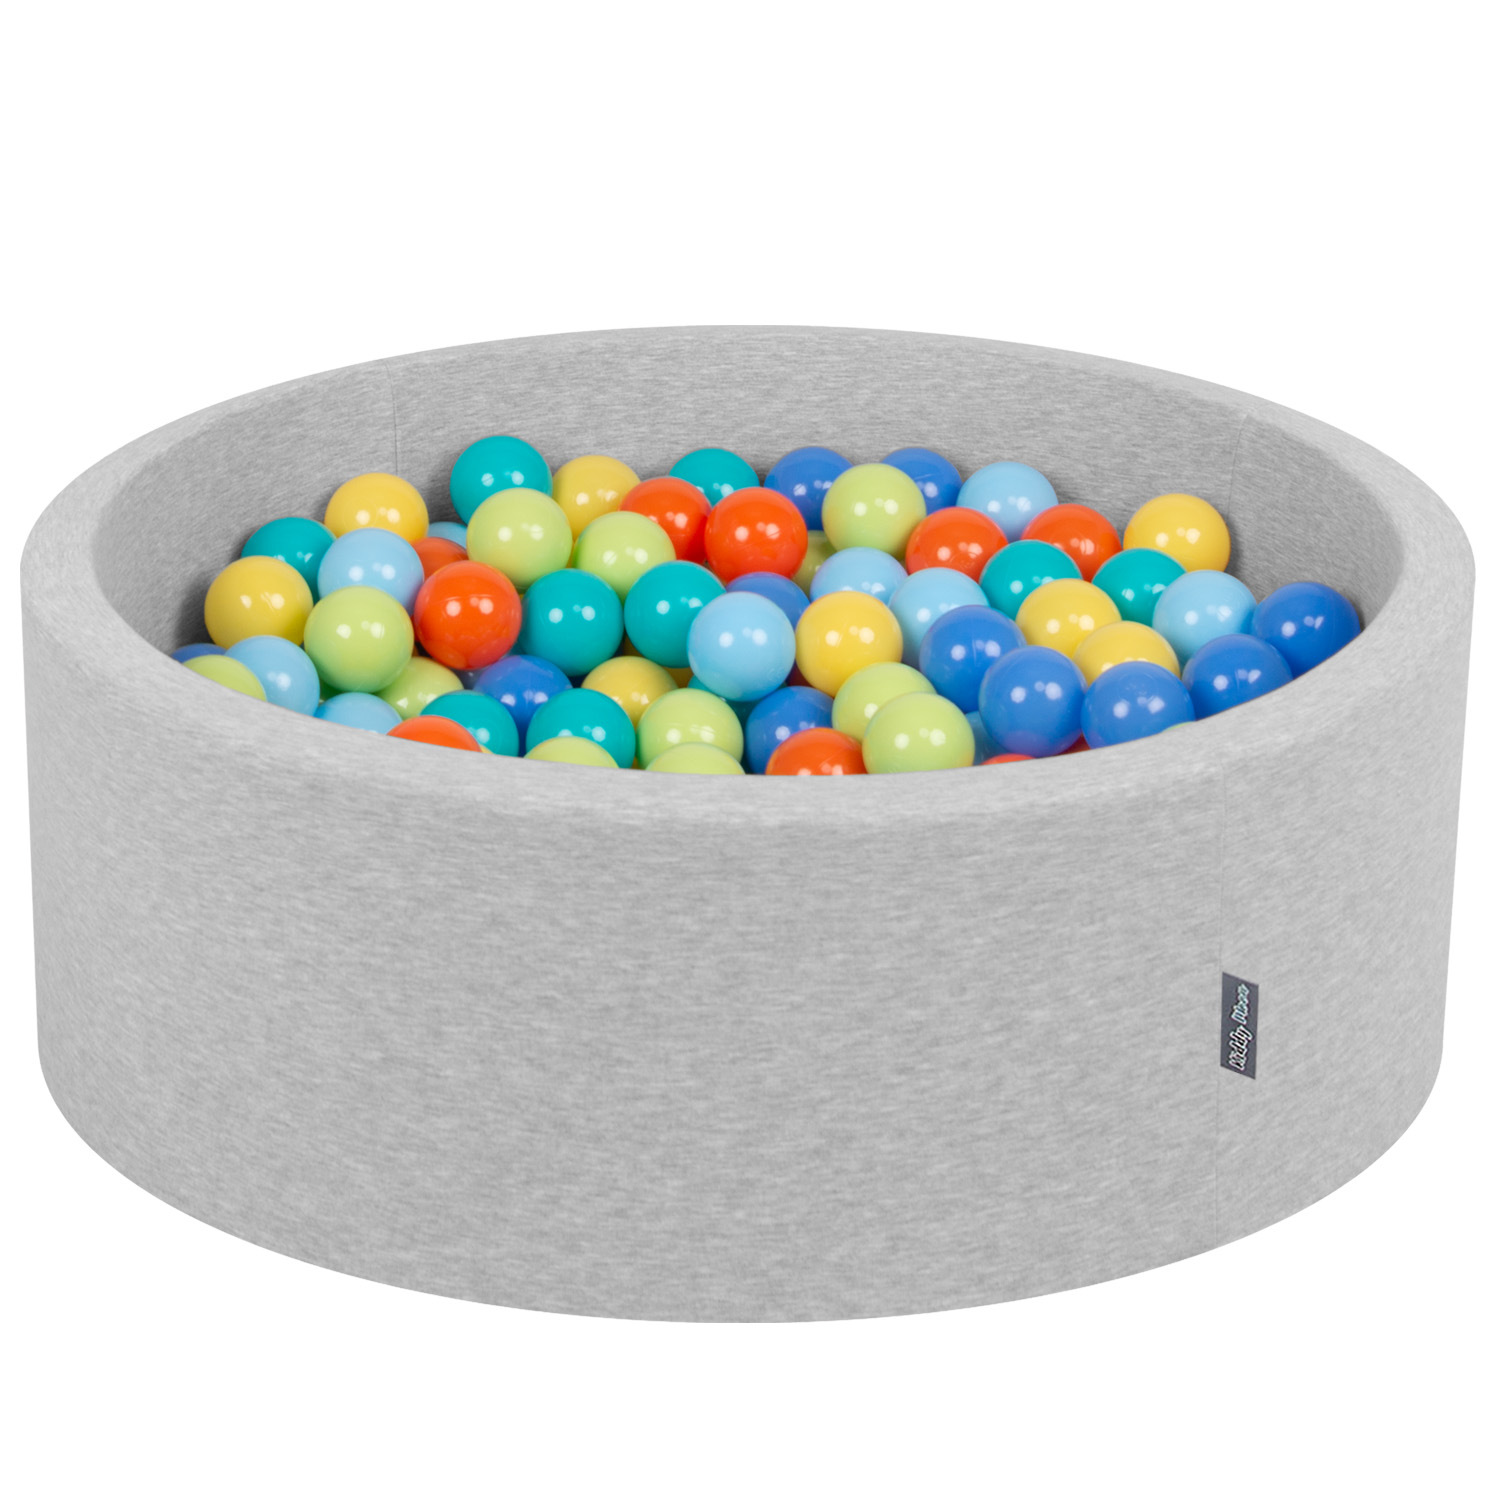 KiddyMoon New Soft Baby Ball Pit Foam Pool with 200/300 Balls,MultiColored 